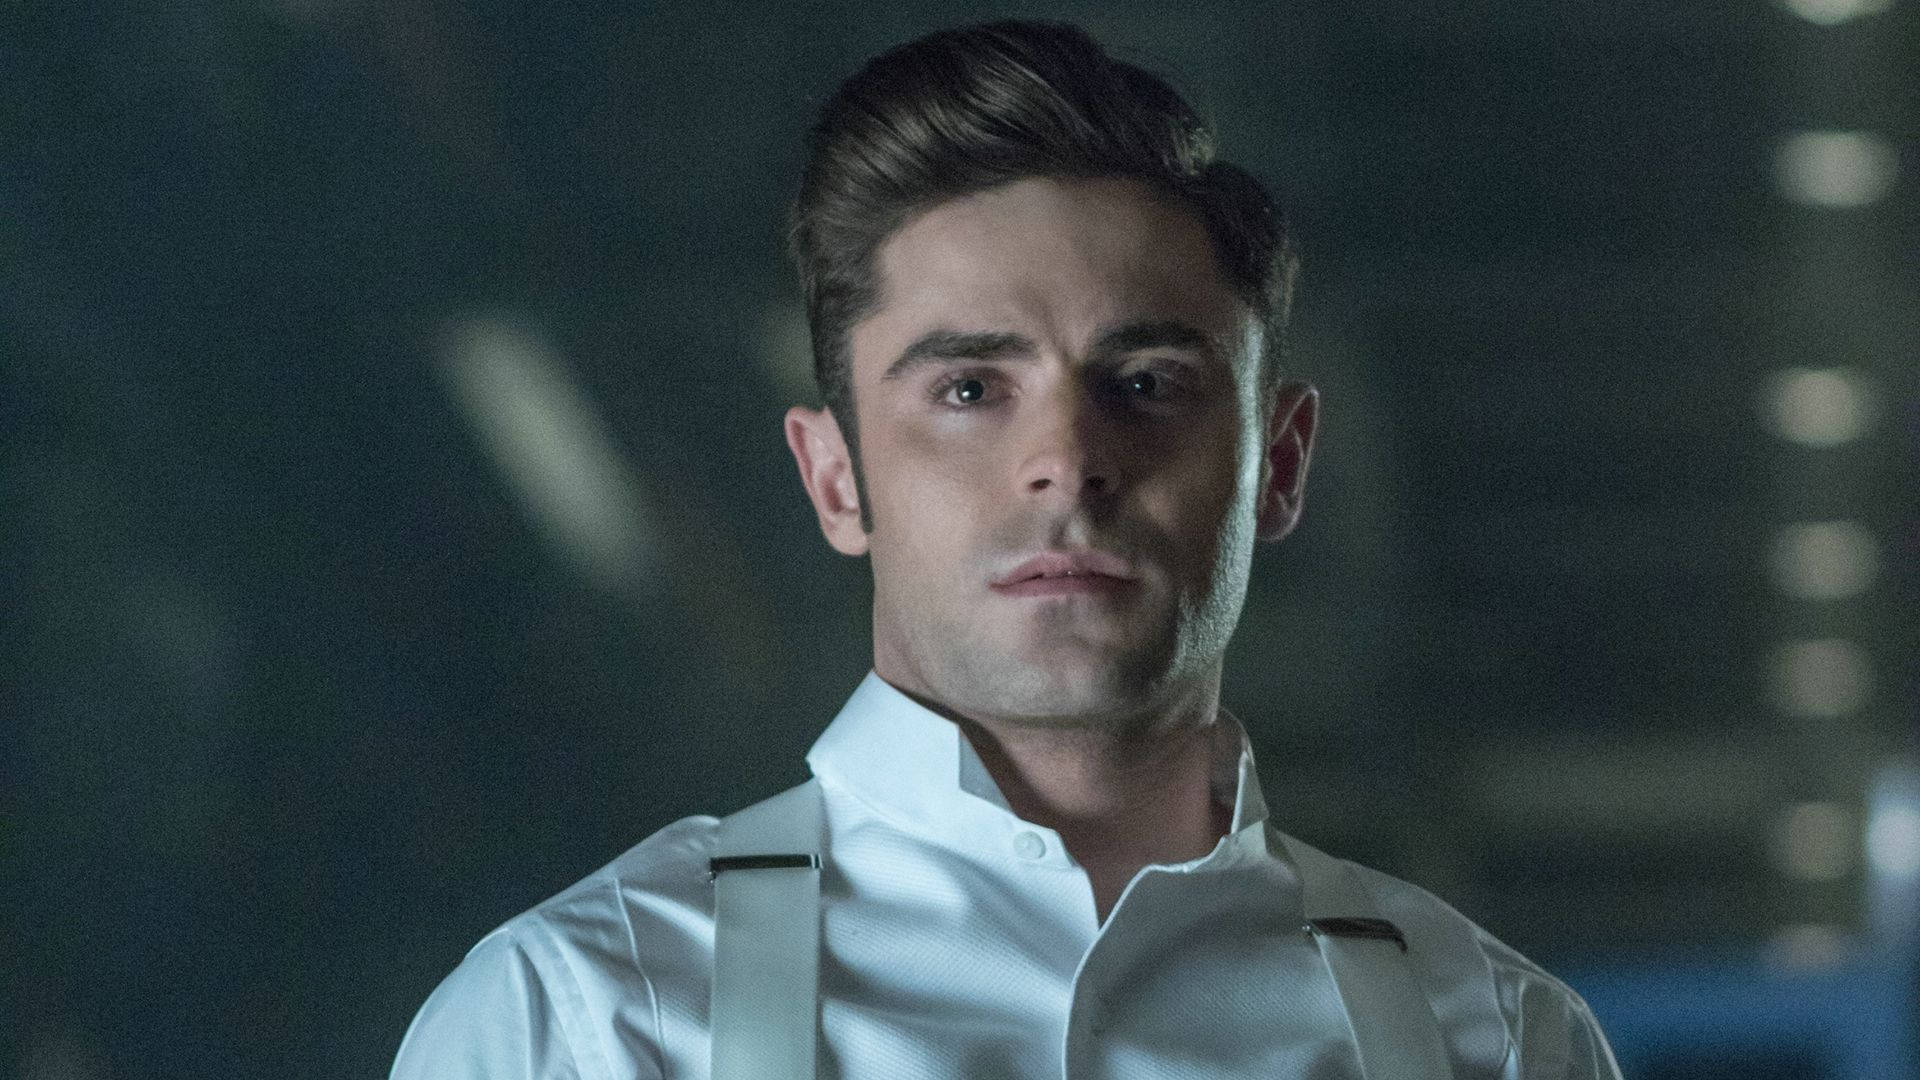 1920x1080 Download Zac Efron In The Greatest Showman Wallpaper